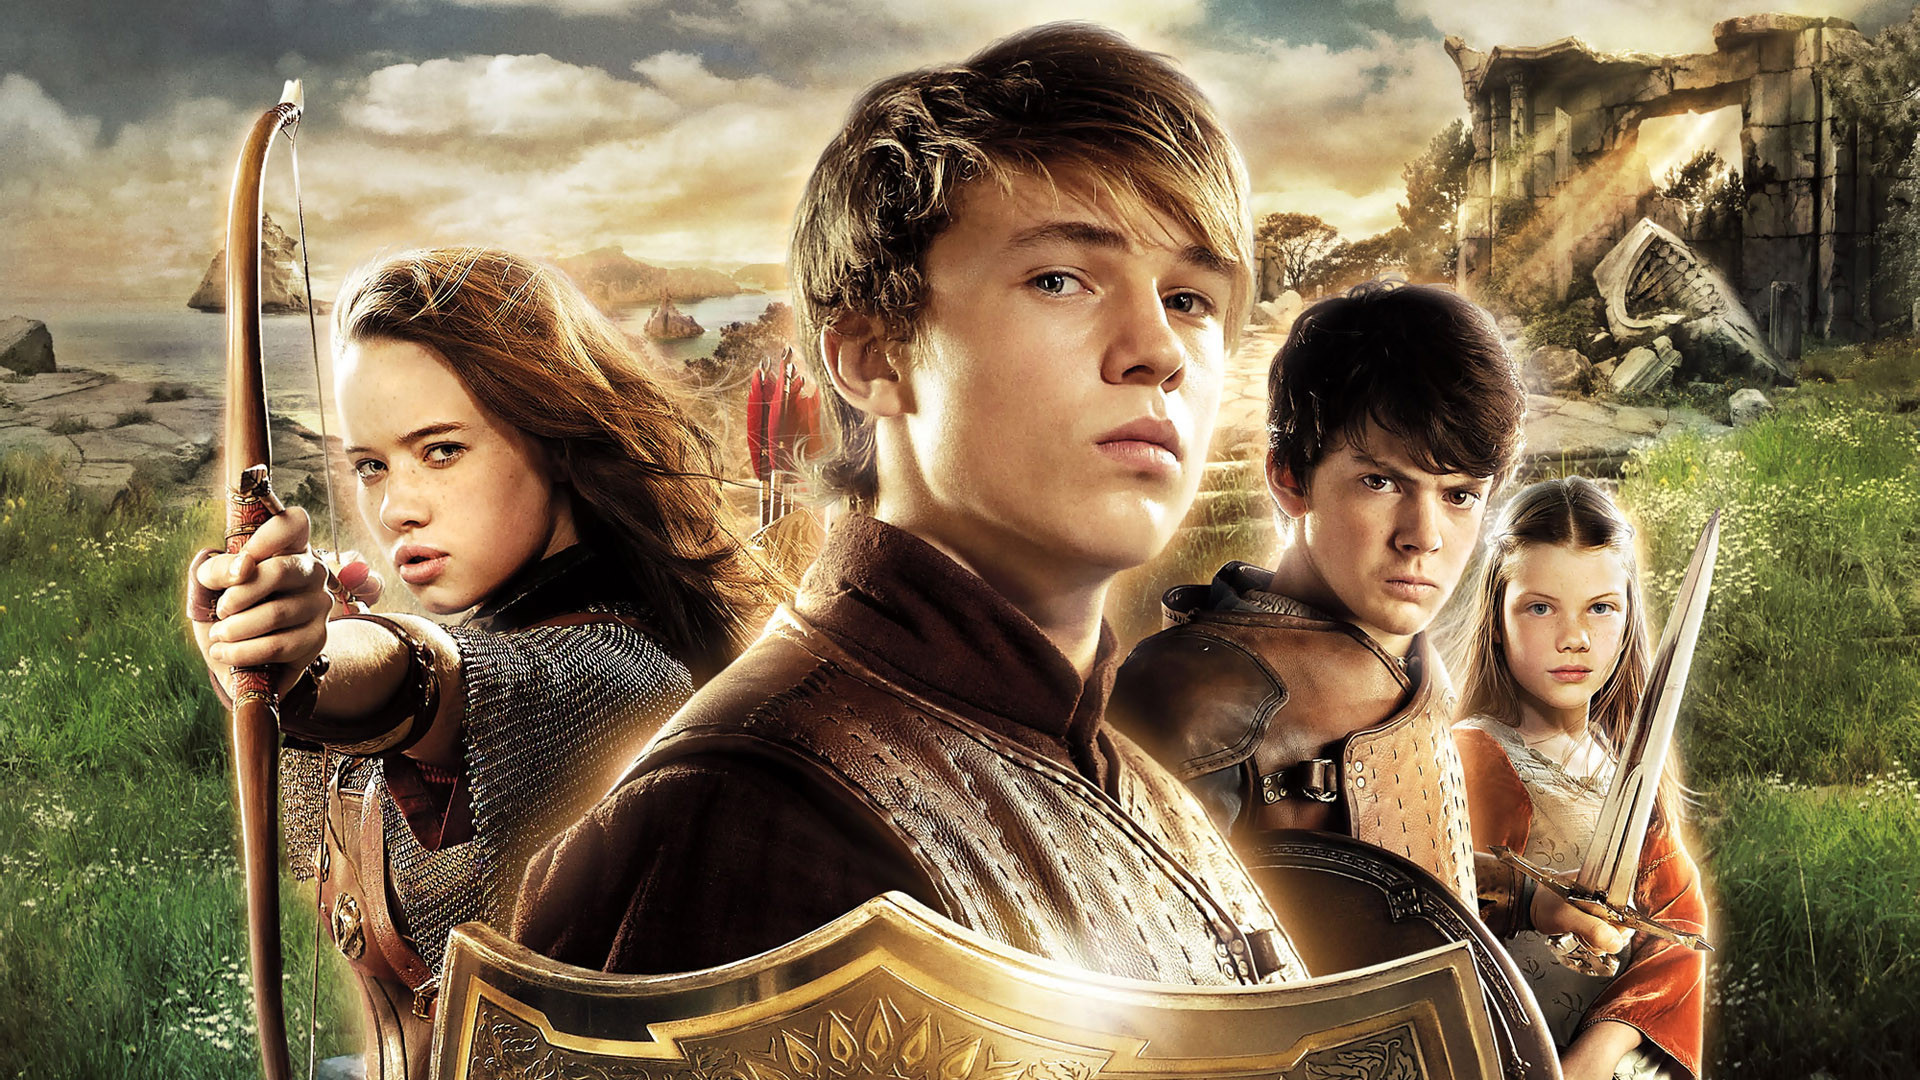 1920x1080 The Chronicles of Narnia Wallpaper 7 - 1920 X 1080